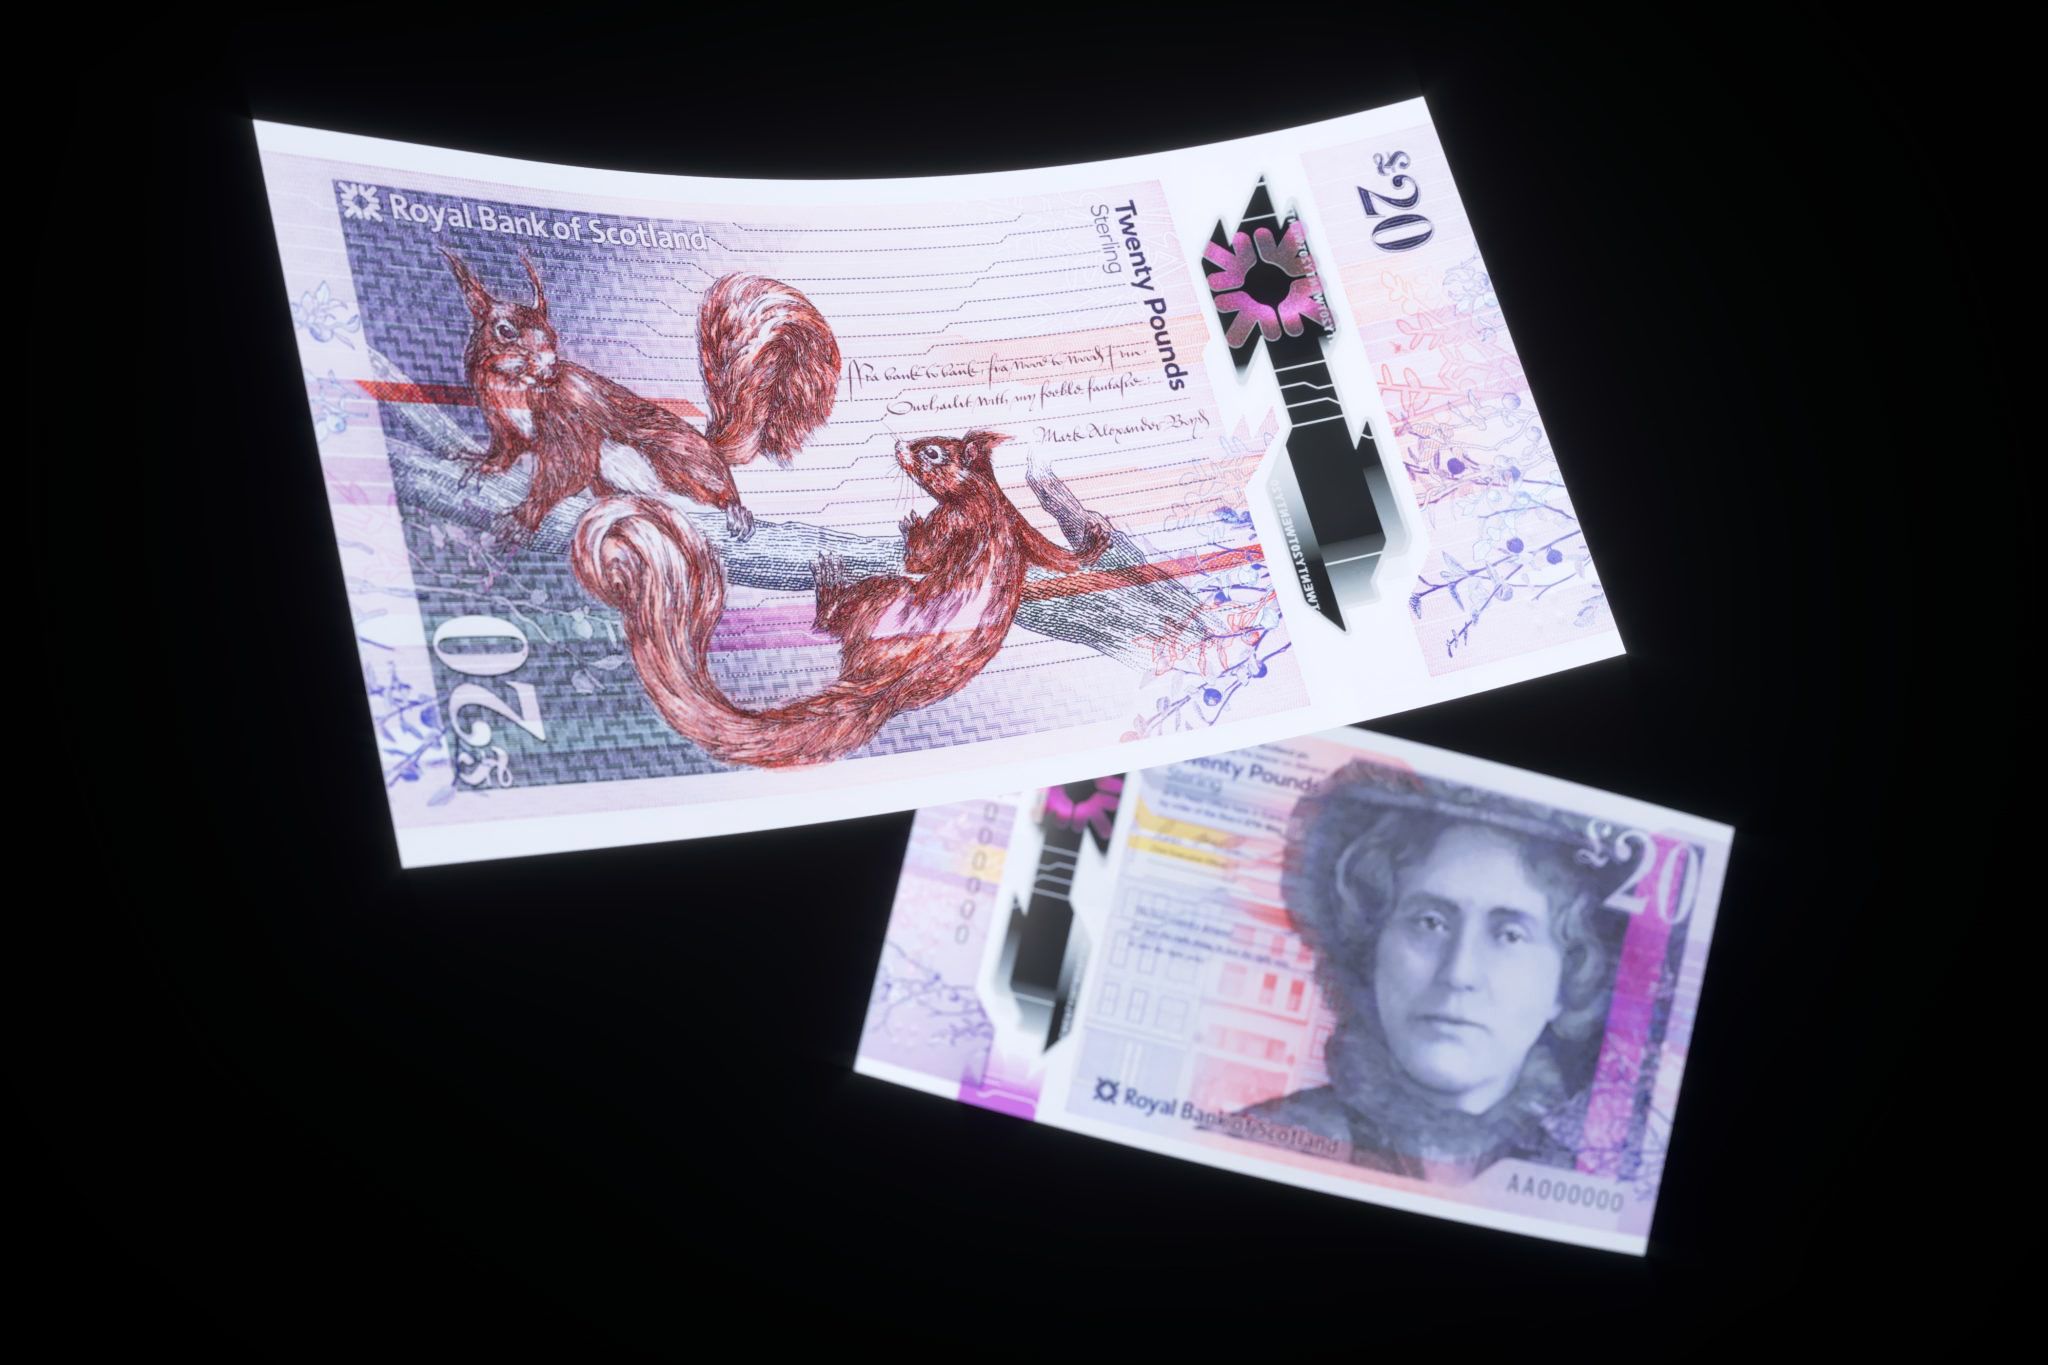 Royal Bank of Scotland £20 new polymer banknote featuring Kate Cranston and red squirrels. Currency design by O Street, Glasgow.